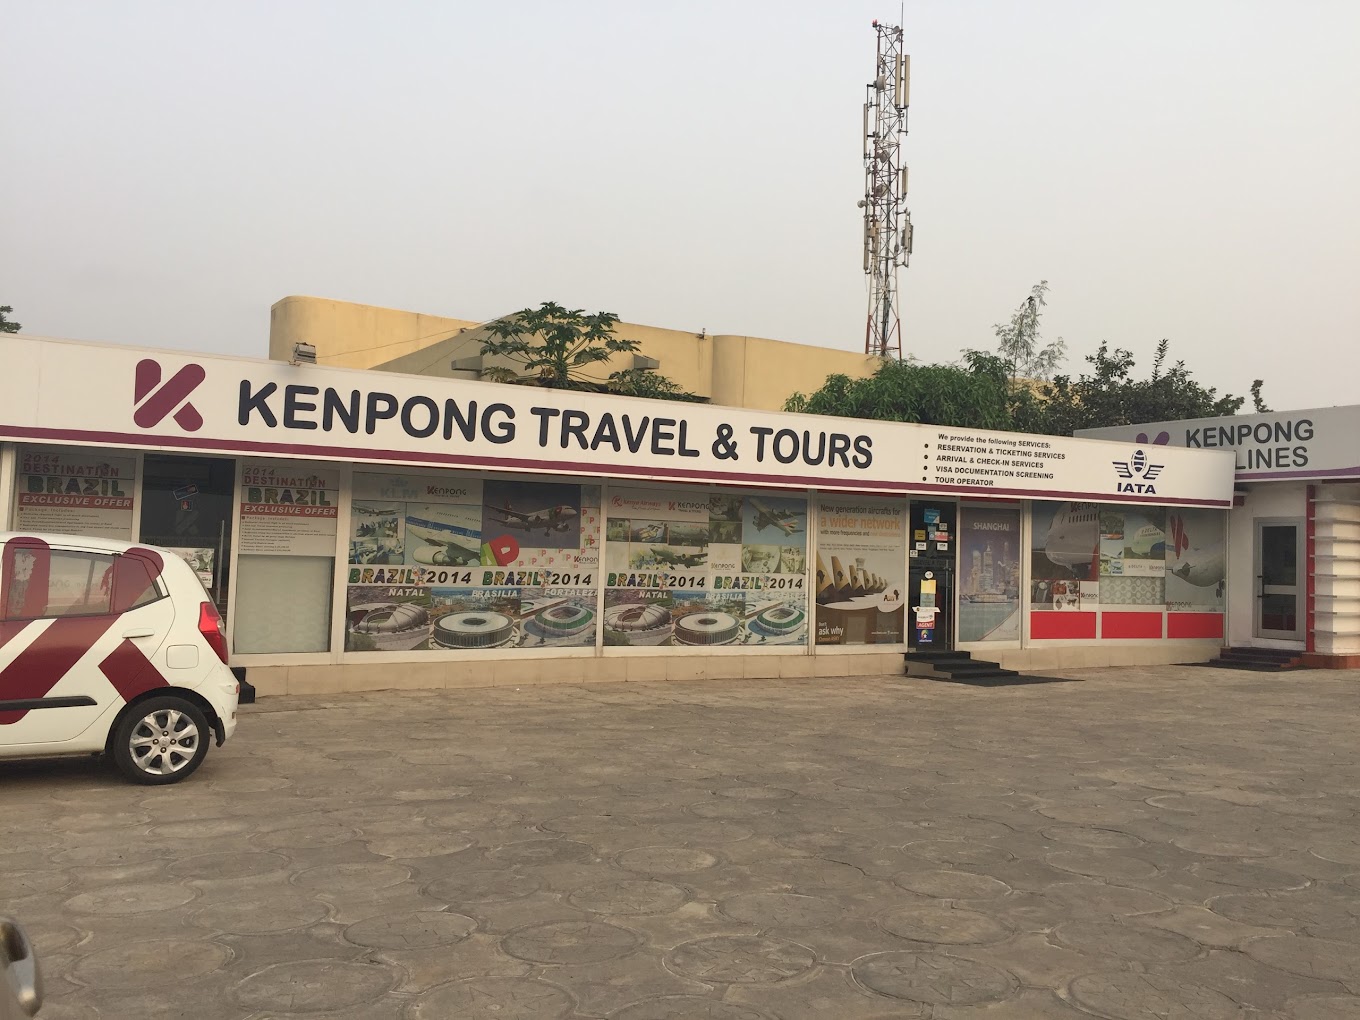 kenpong travel and tour prices